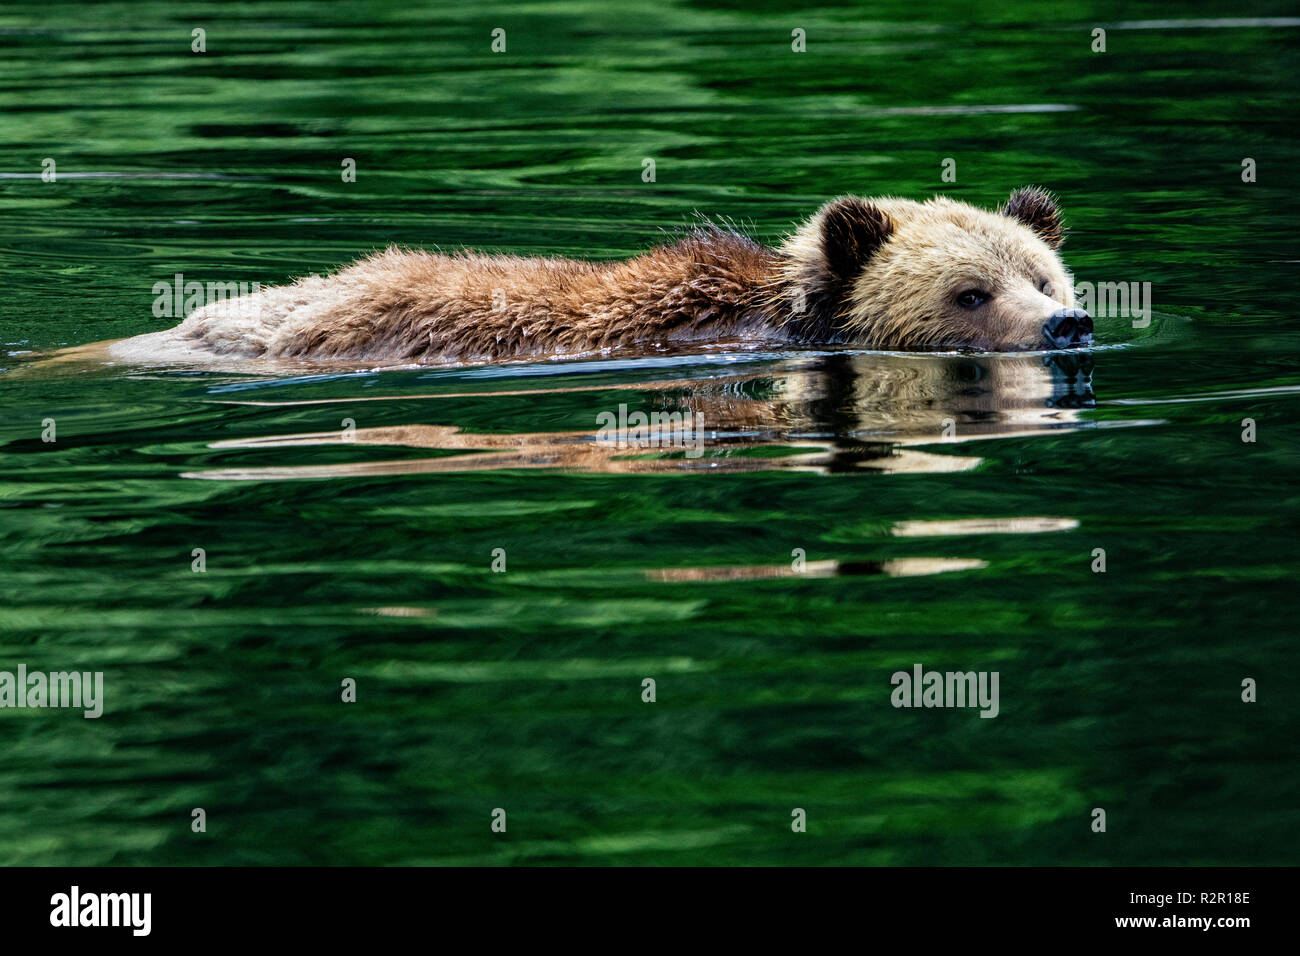 Grizzly bear swimming, Knight Inlet, First Nations Territory, British Columbia, Canada Stock Photo